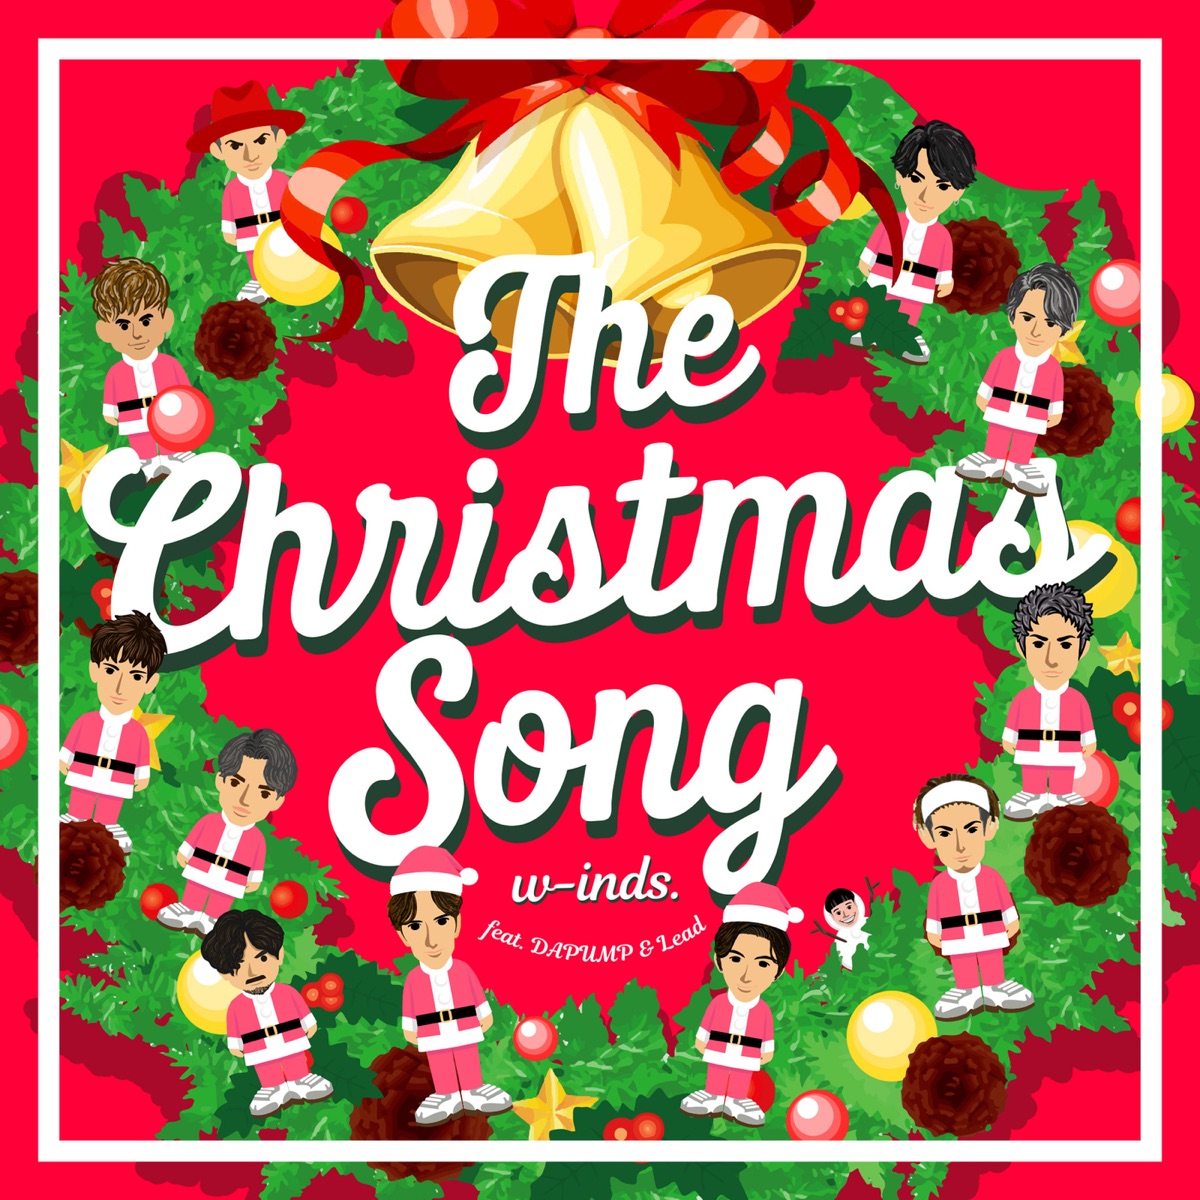 Cover art for『w-inds. - The Christmas Song (feat. DA PUMP & Lead)』from the release『The Christmas Song (feat. DA PUMP & Lead)